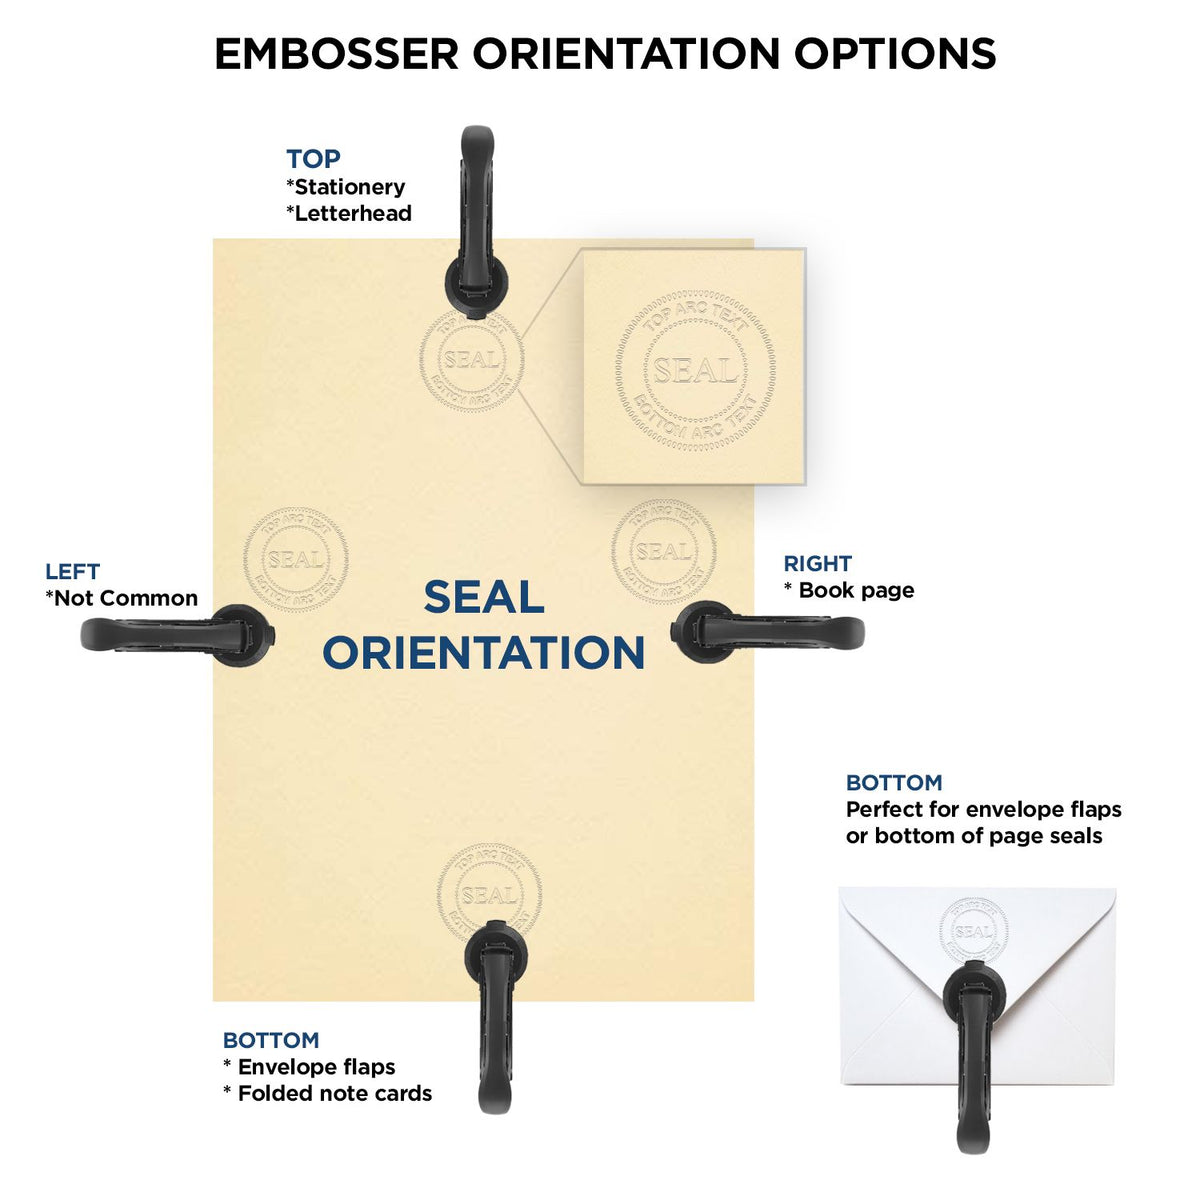 An infographic for the Long Reach New Hampshire PE Seal showing embosser orientation, this is showing examples of a top, bottom, right and left insert.